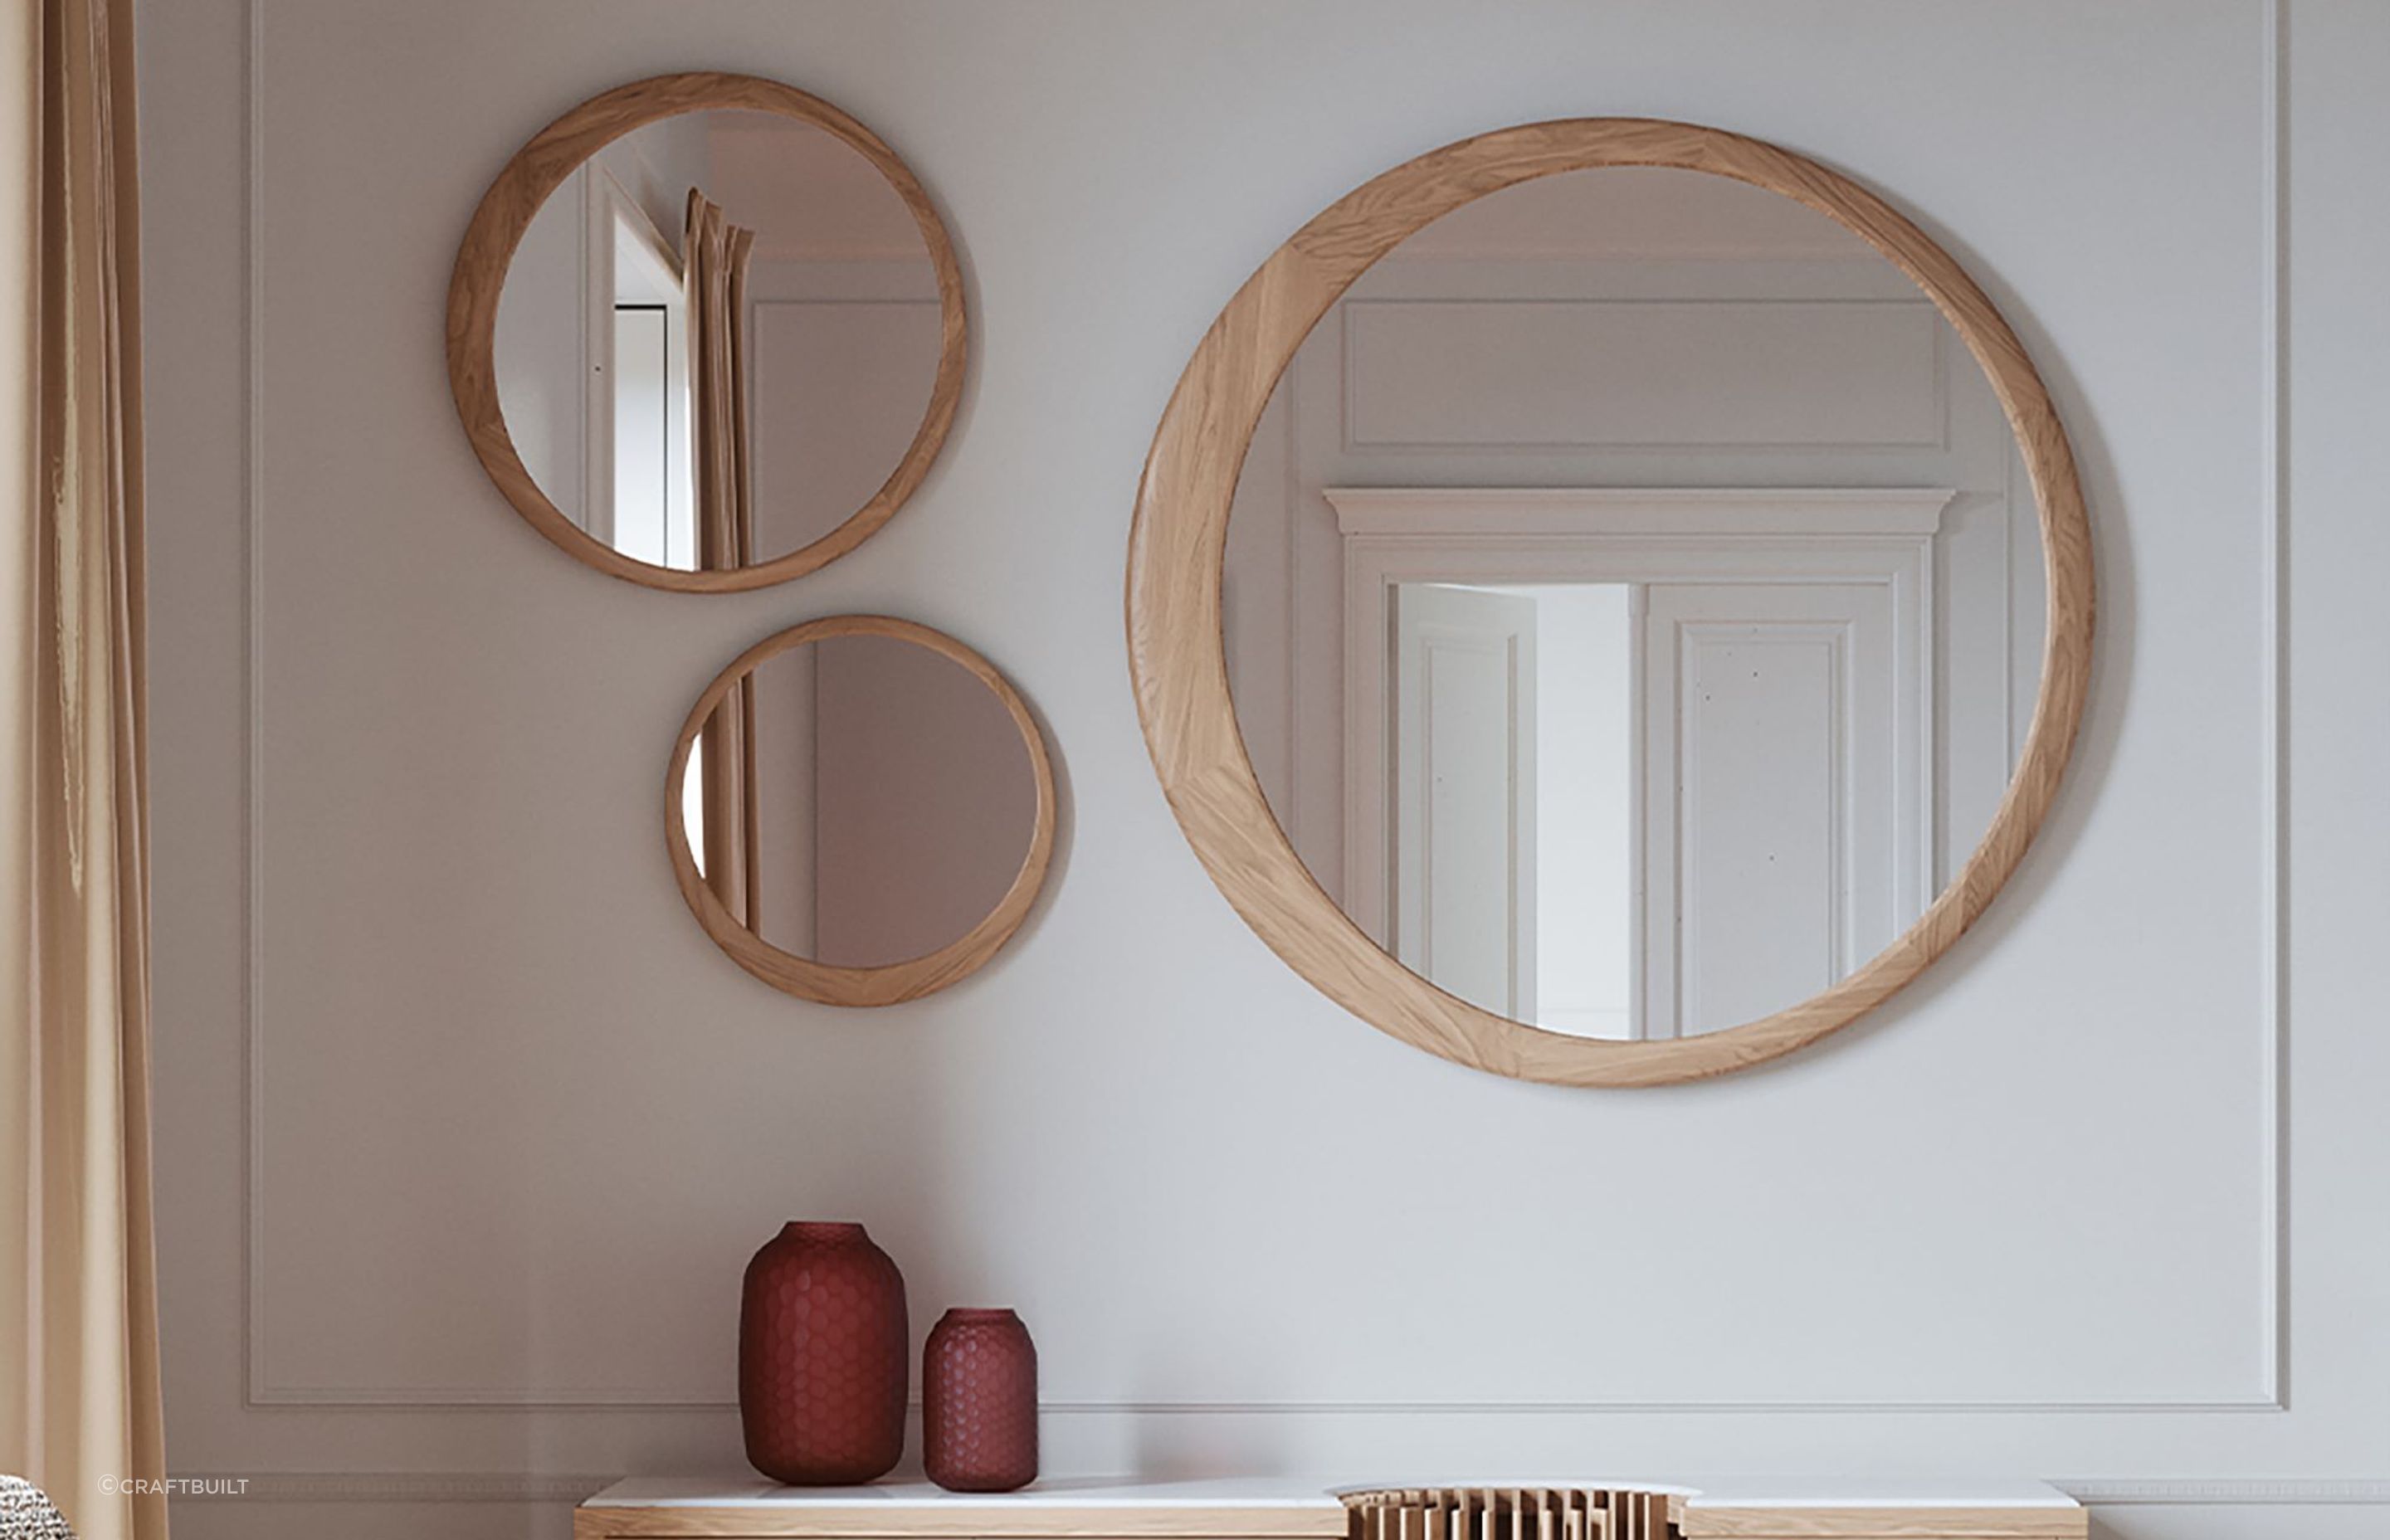 Different sized models of the Luna Round Mirror, gracefully combined together in this wall space.